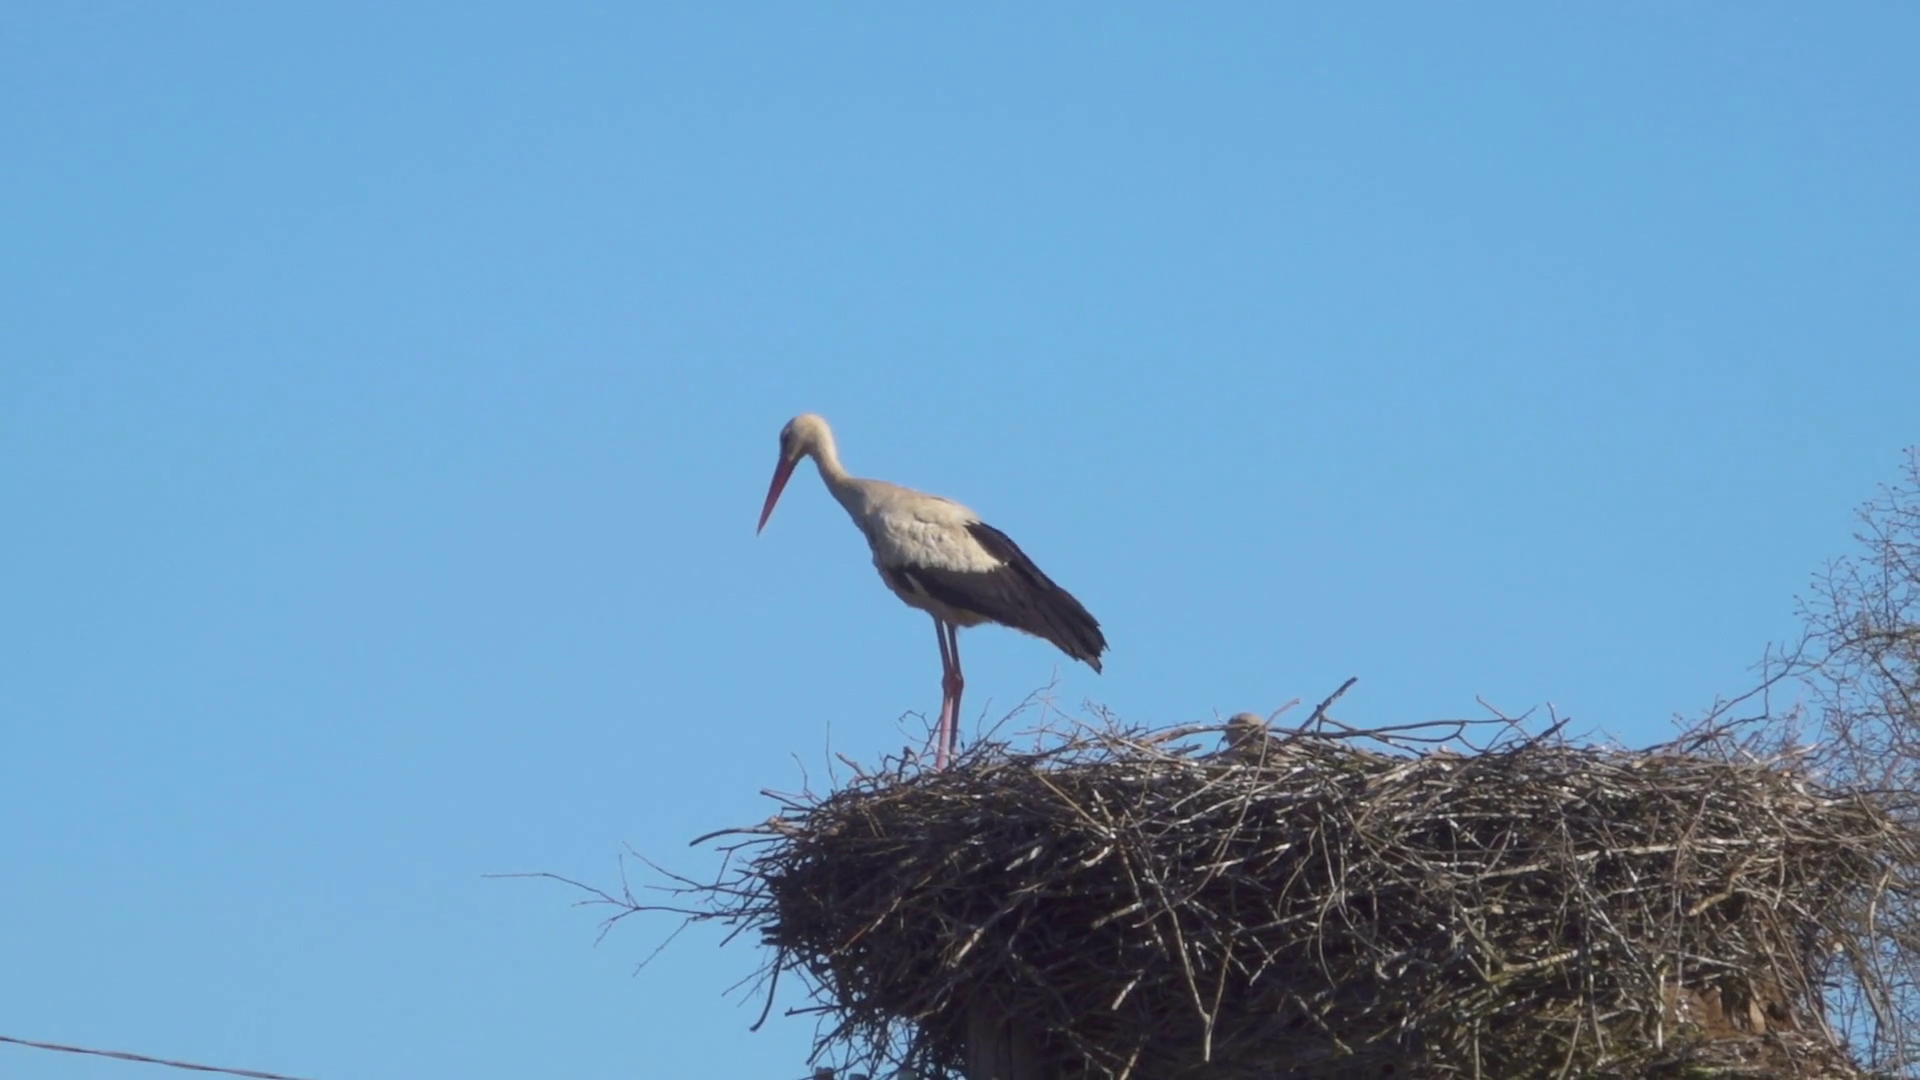 Stork standing in its nest in warm weather on Blue sky background ...